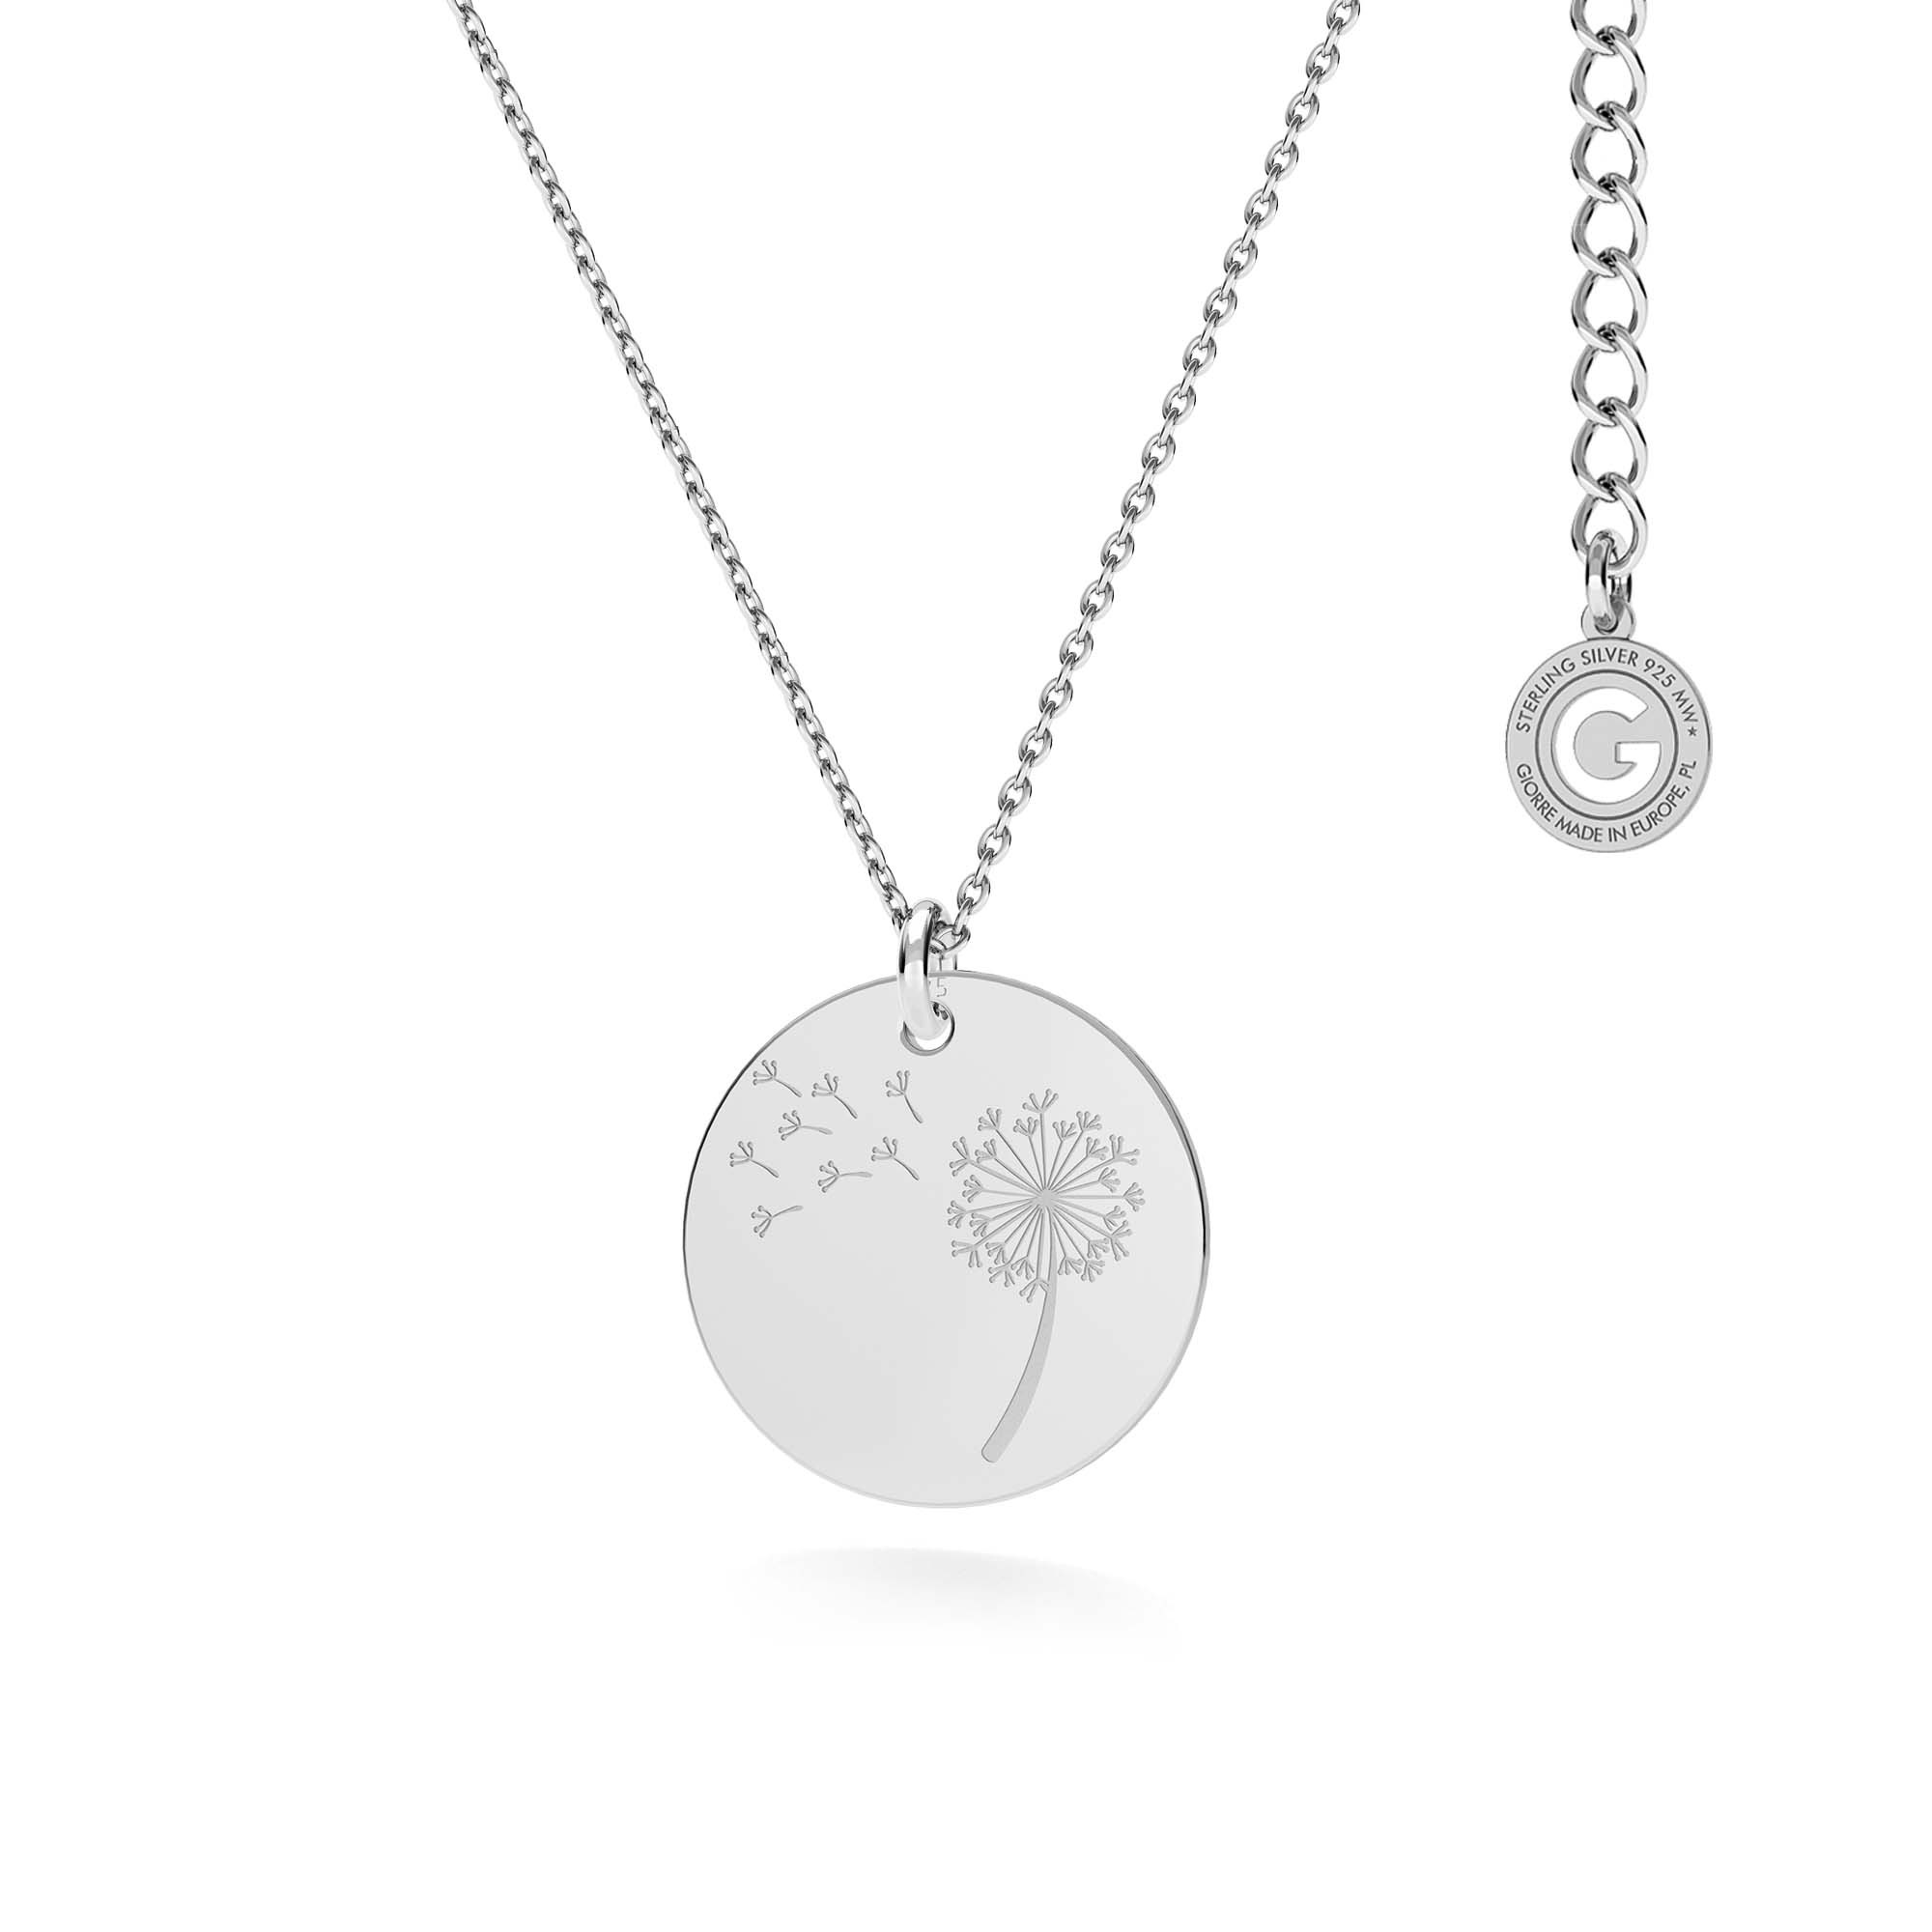 Necklace for mother & child, girl engraveing, sterling silver 925